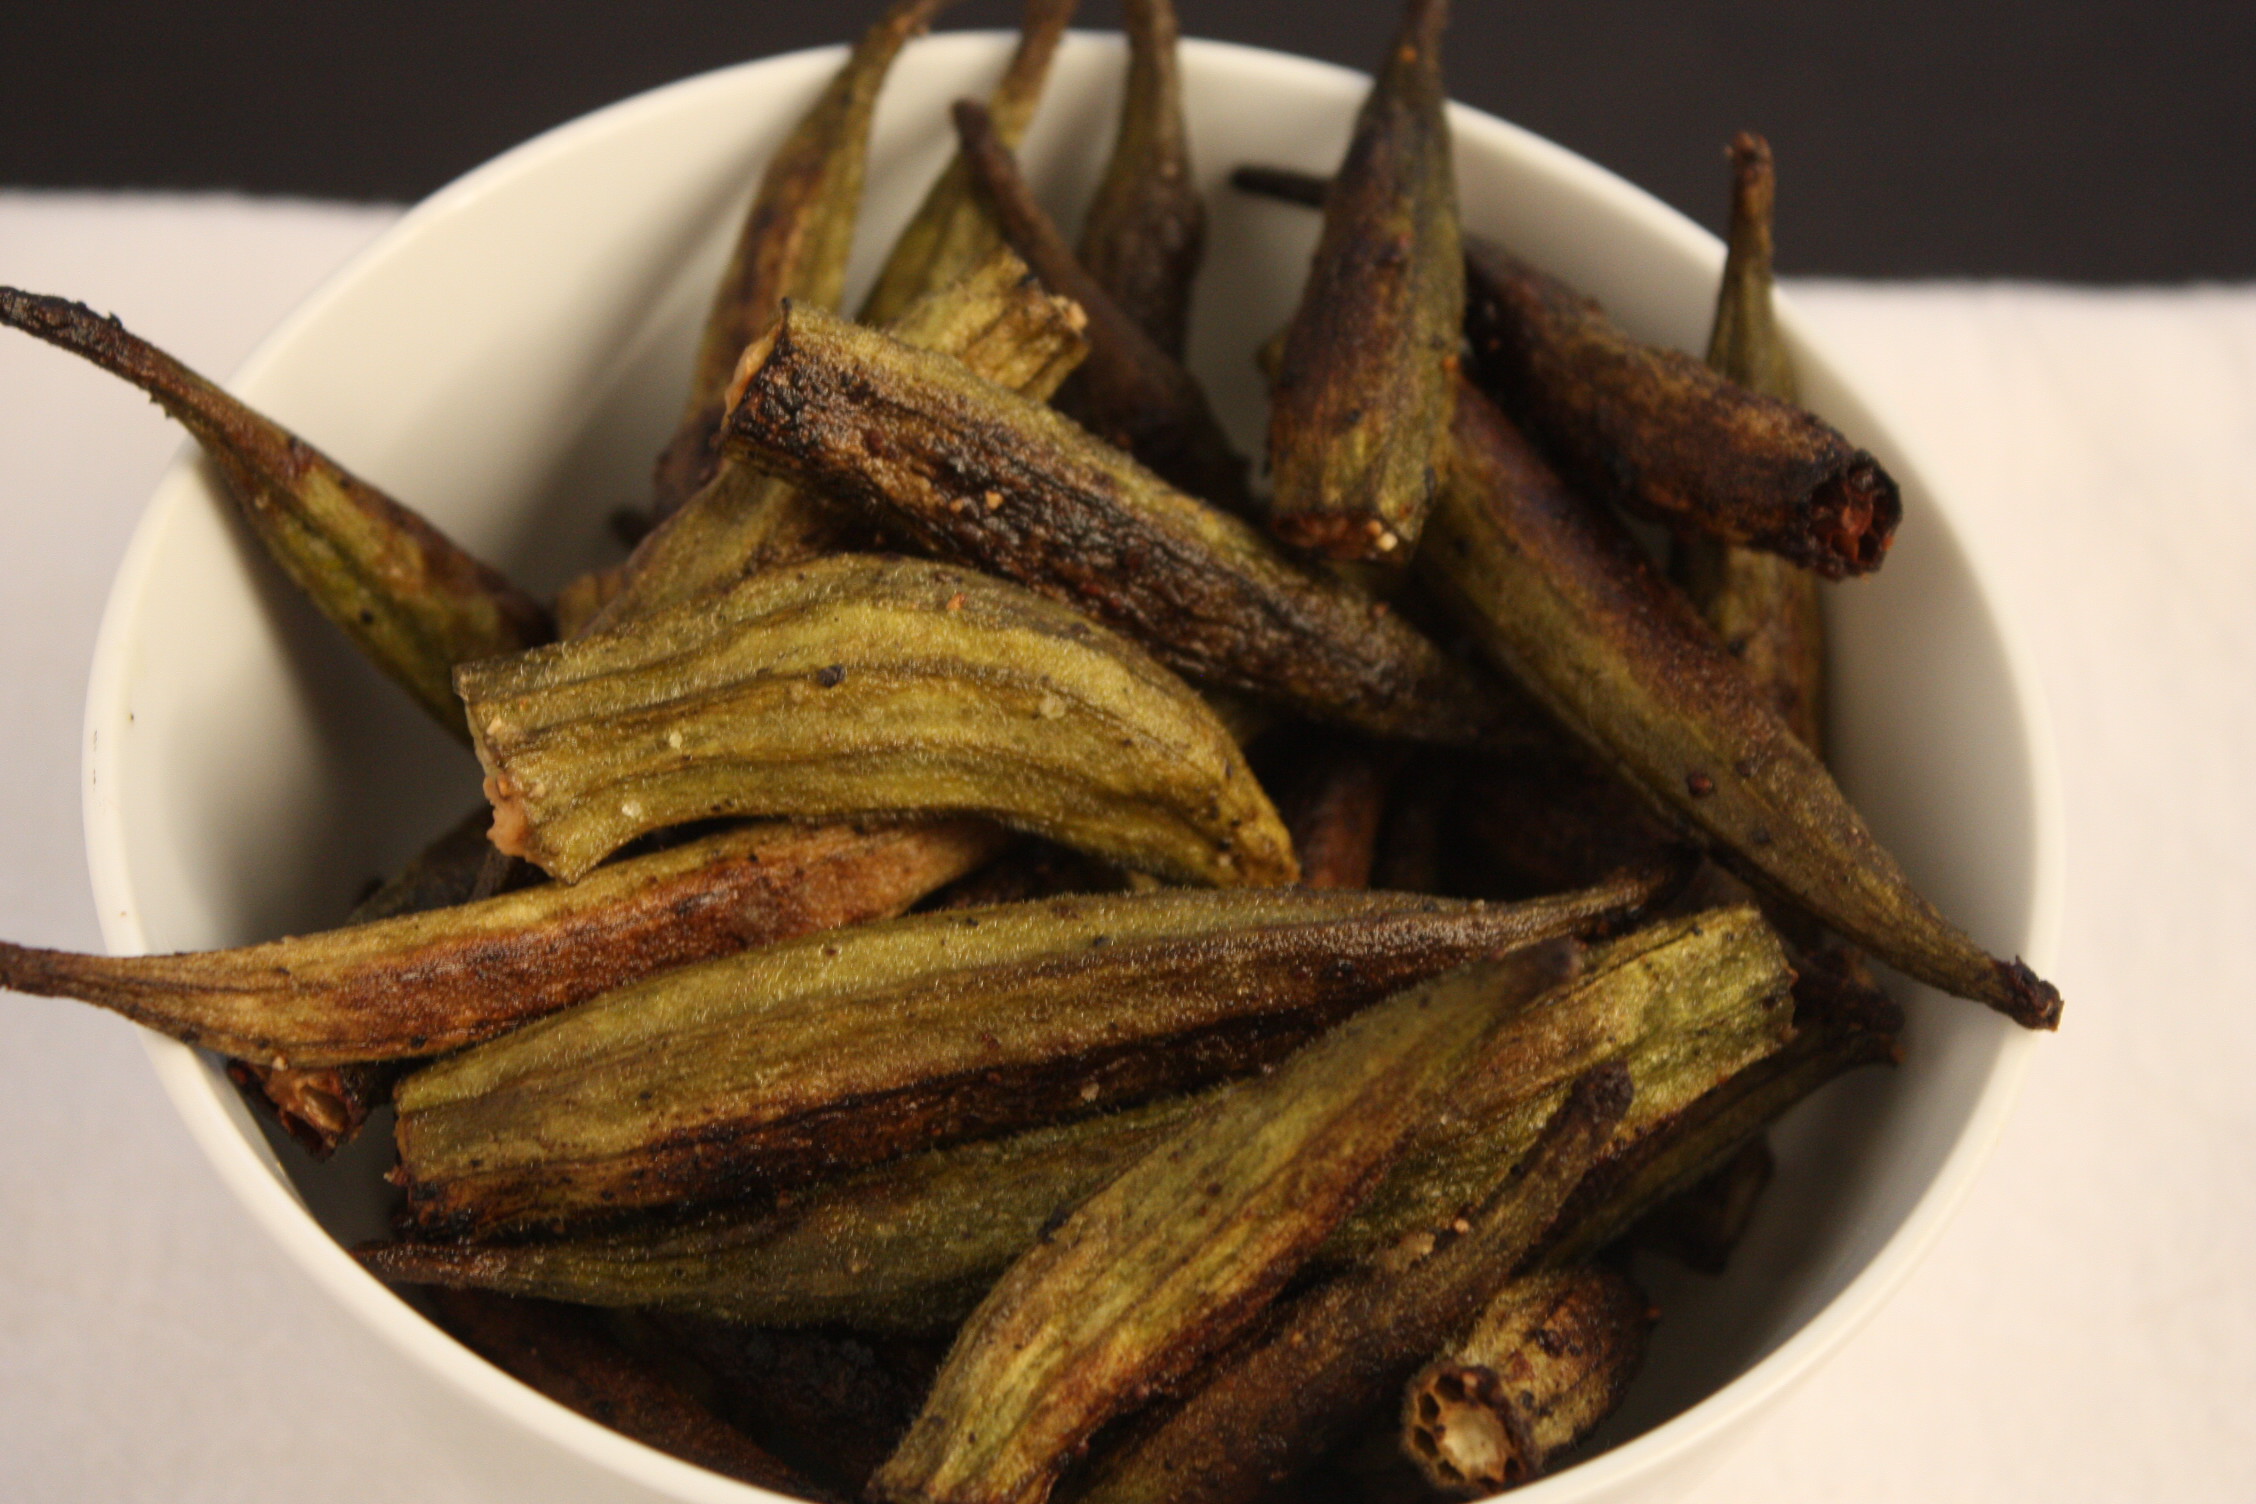 This Roasted Okra recipe allows it's natural flavor to shine. Not slimy, crispy, and delicious.